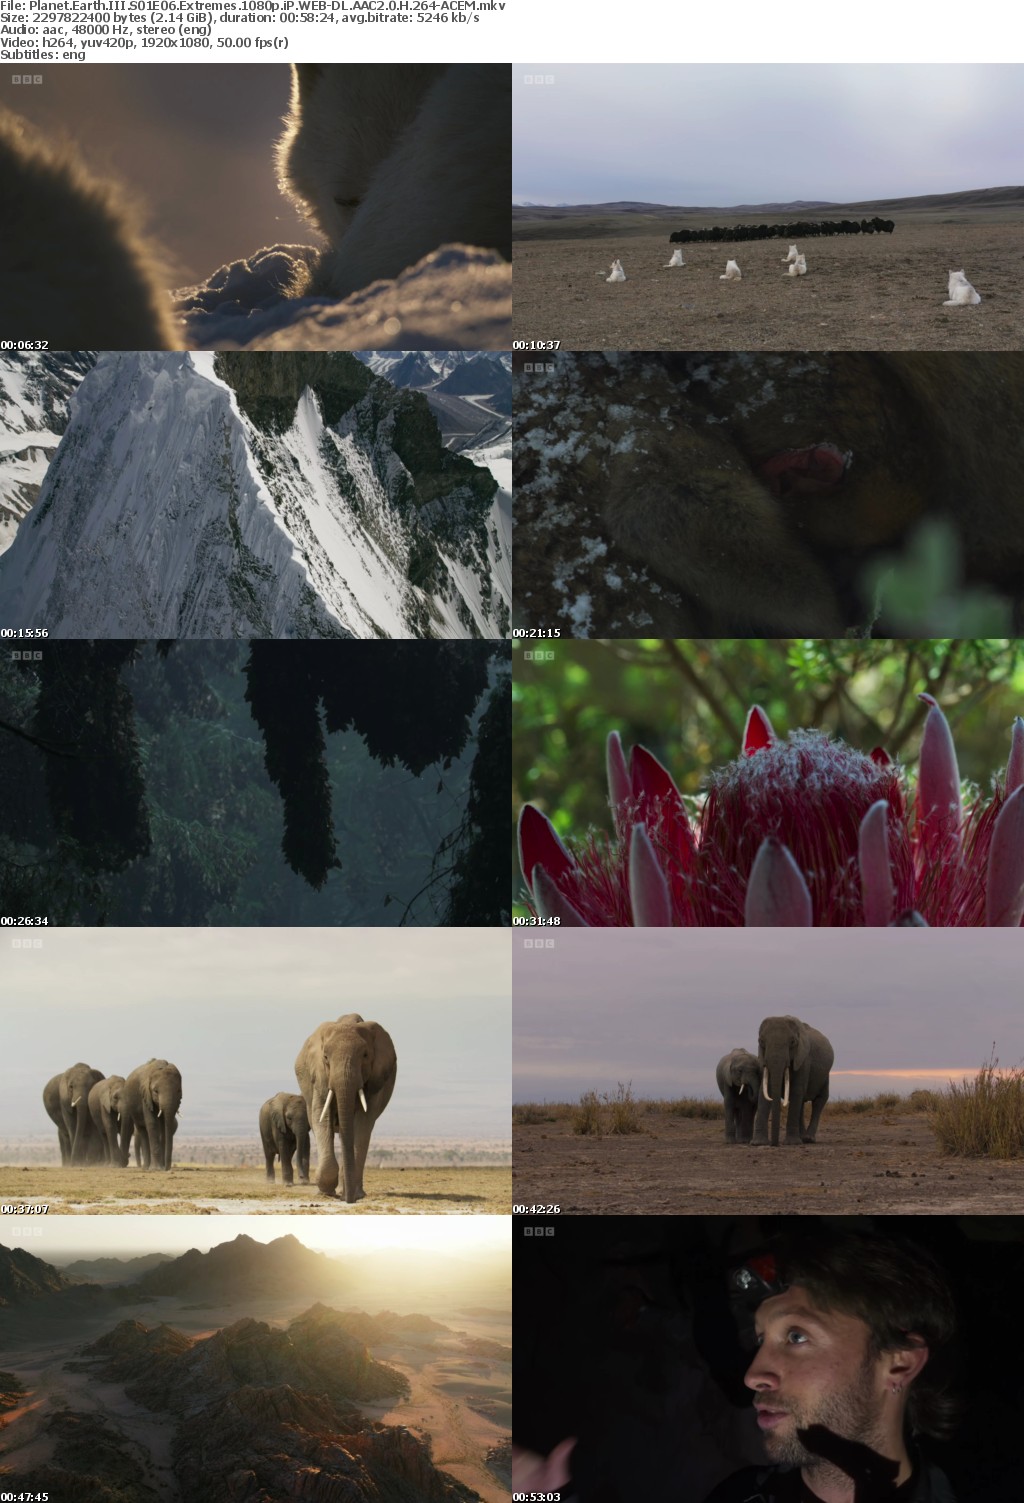 Planet Earth III S01E06 Extremes 1080p iP WEB-DL AAC2 0 H 264-ACEM